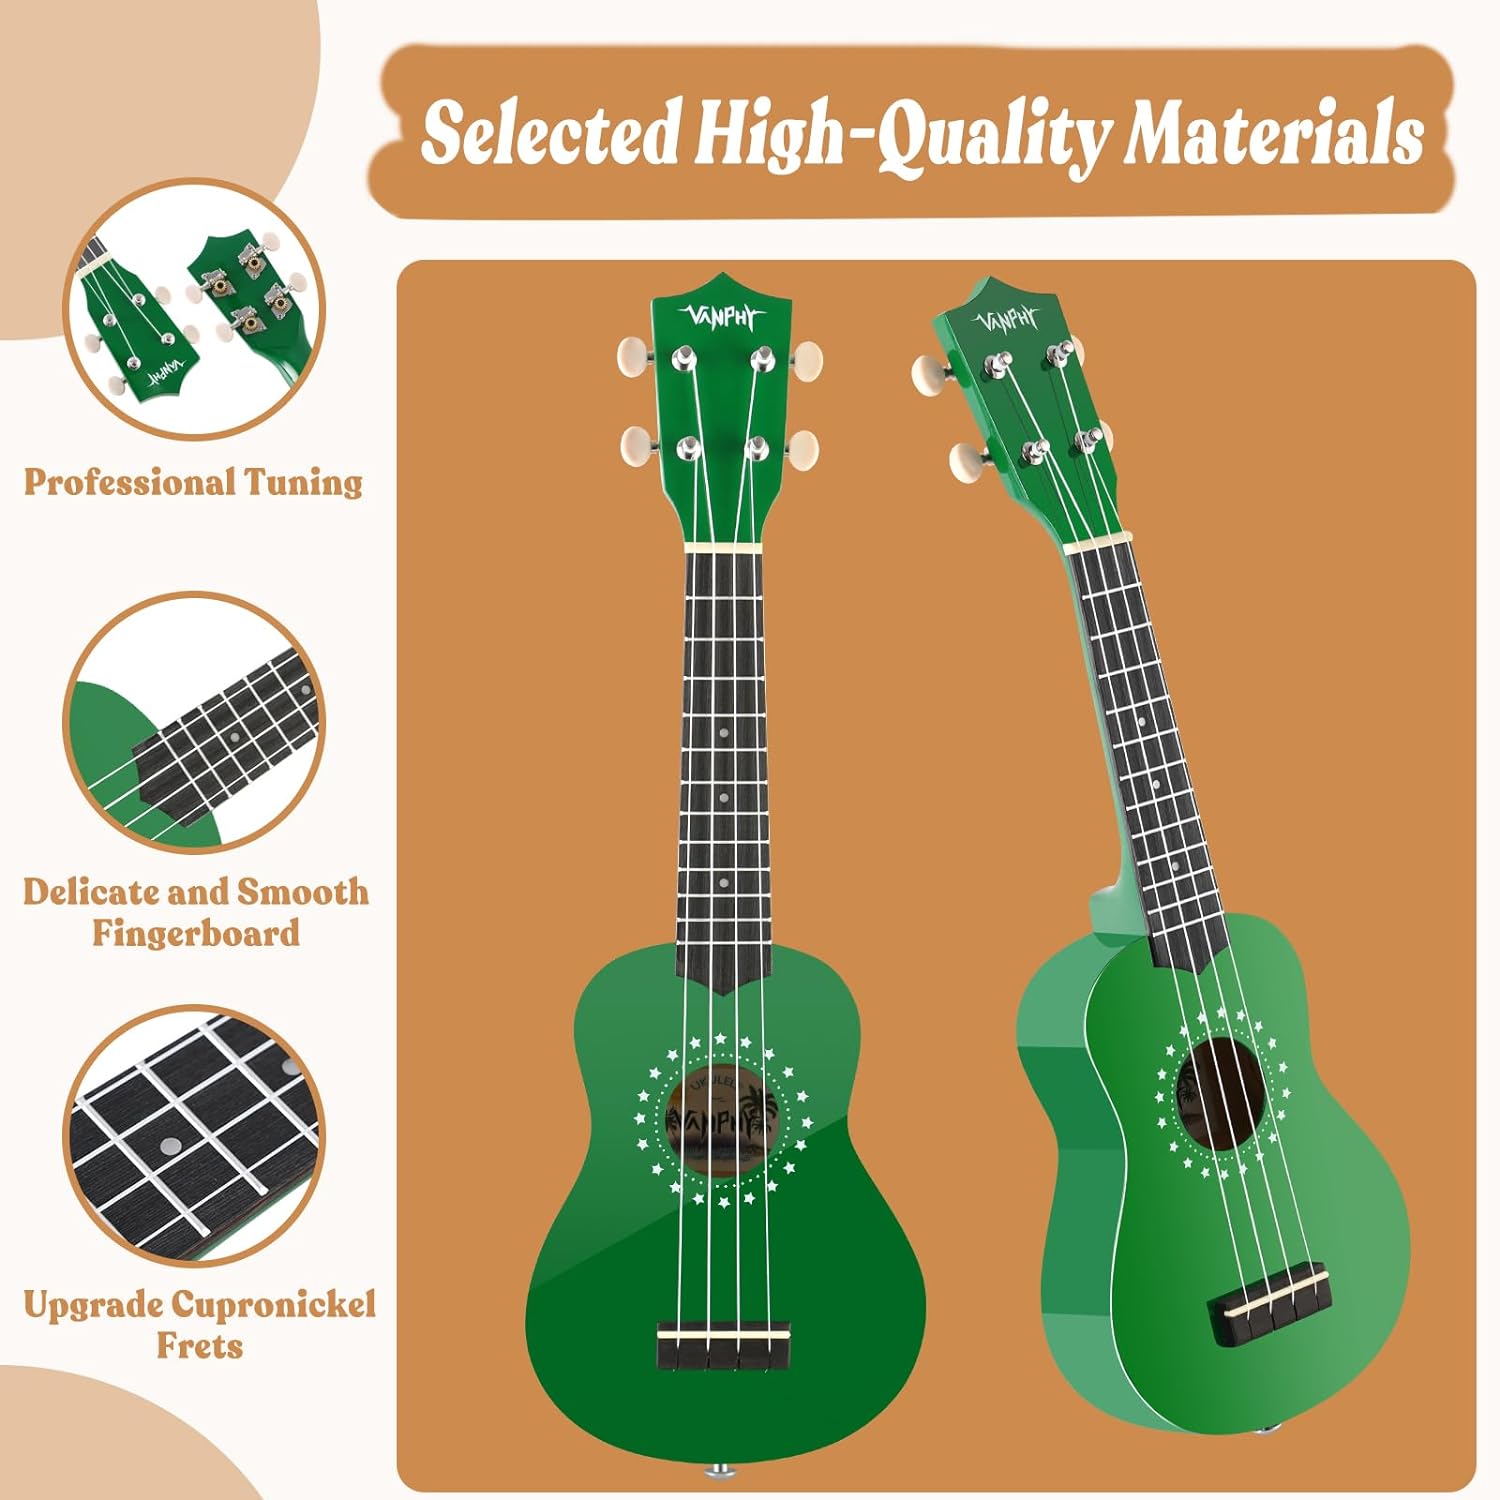 VANPHY Soprano Ukulele for Kids，21 Inch Ukelele with Bag Strap Picks Songbook Cleaning Cloth Suitable for Adults and Beginners（Green）